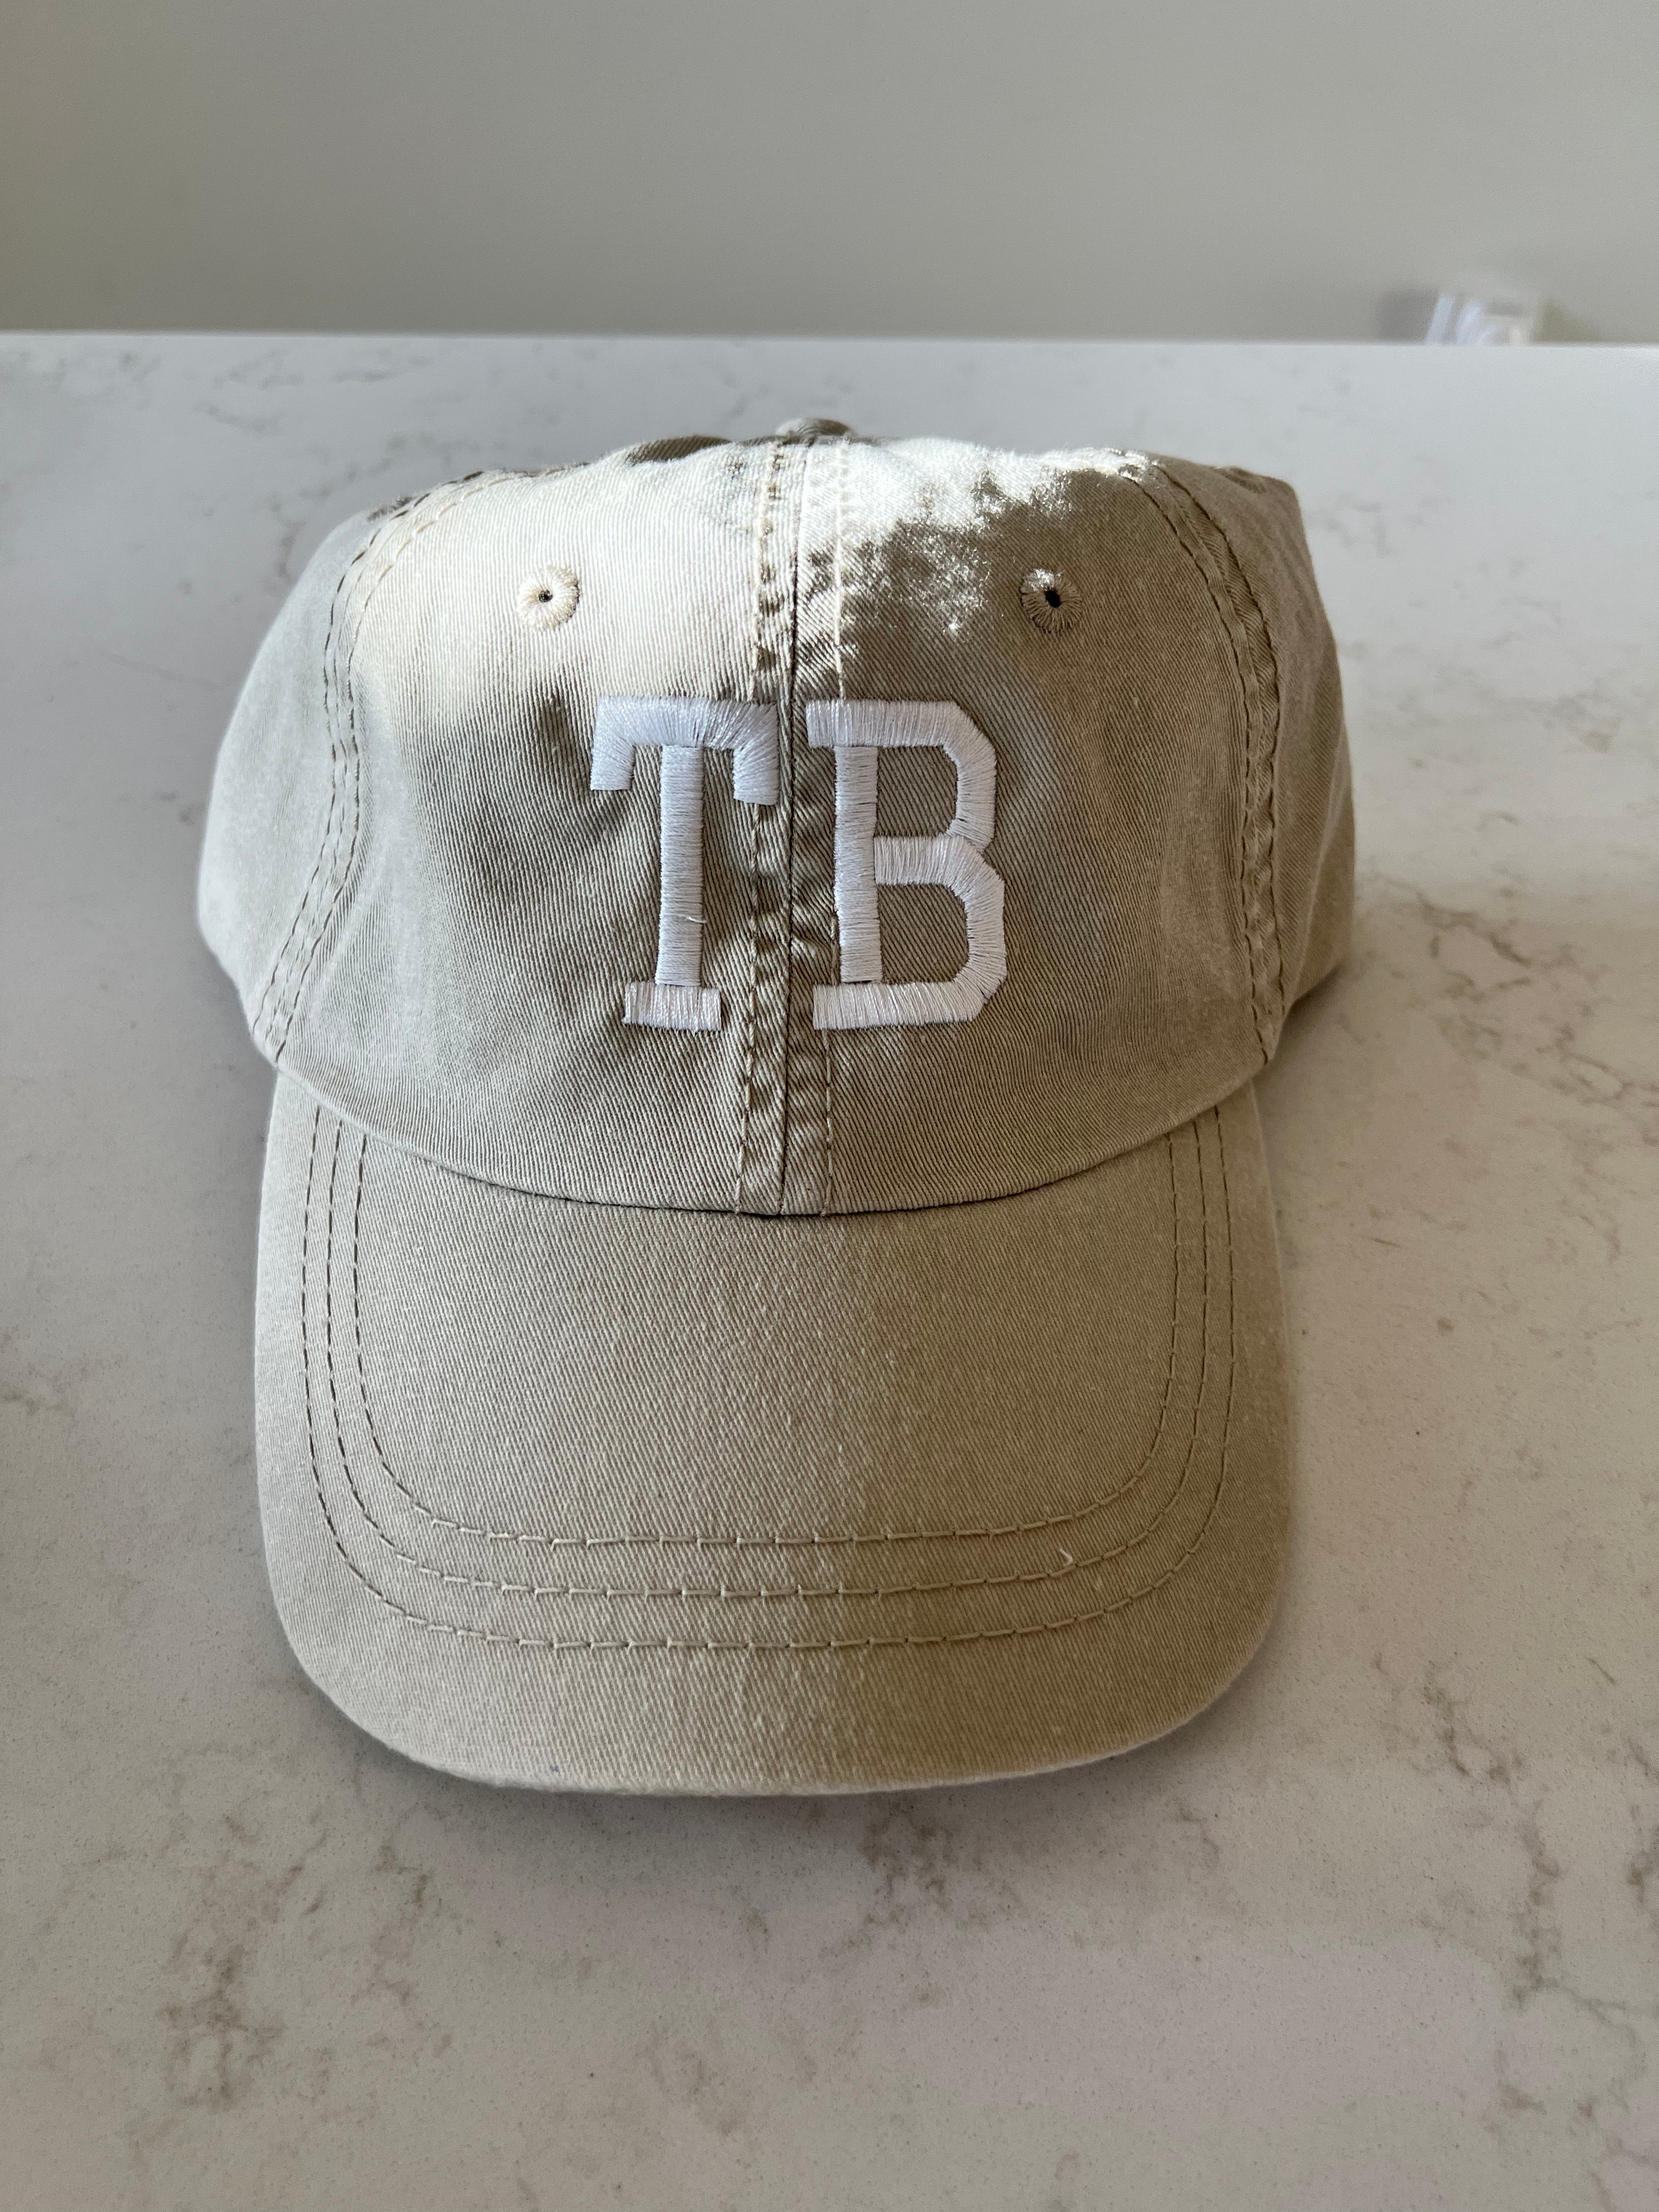 TB Embroidered Ball Cap